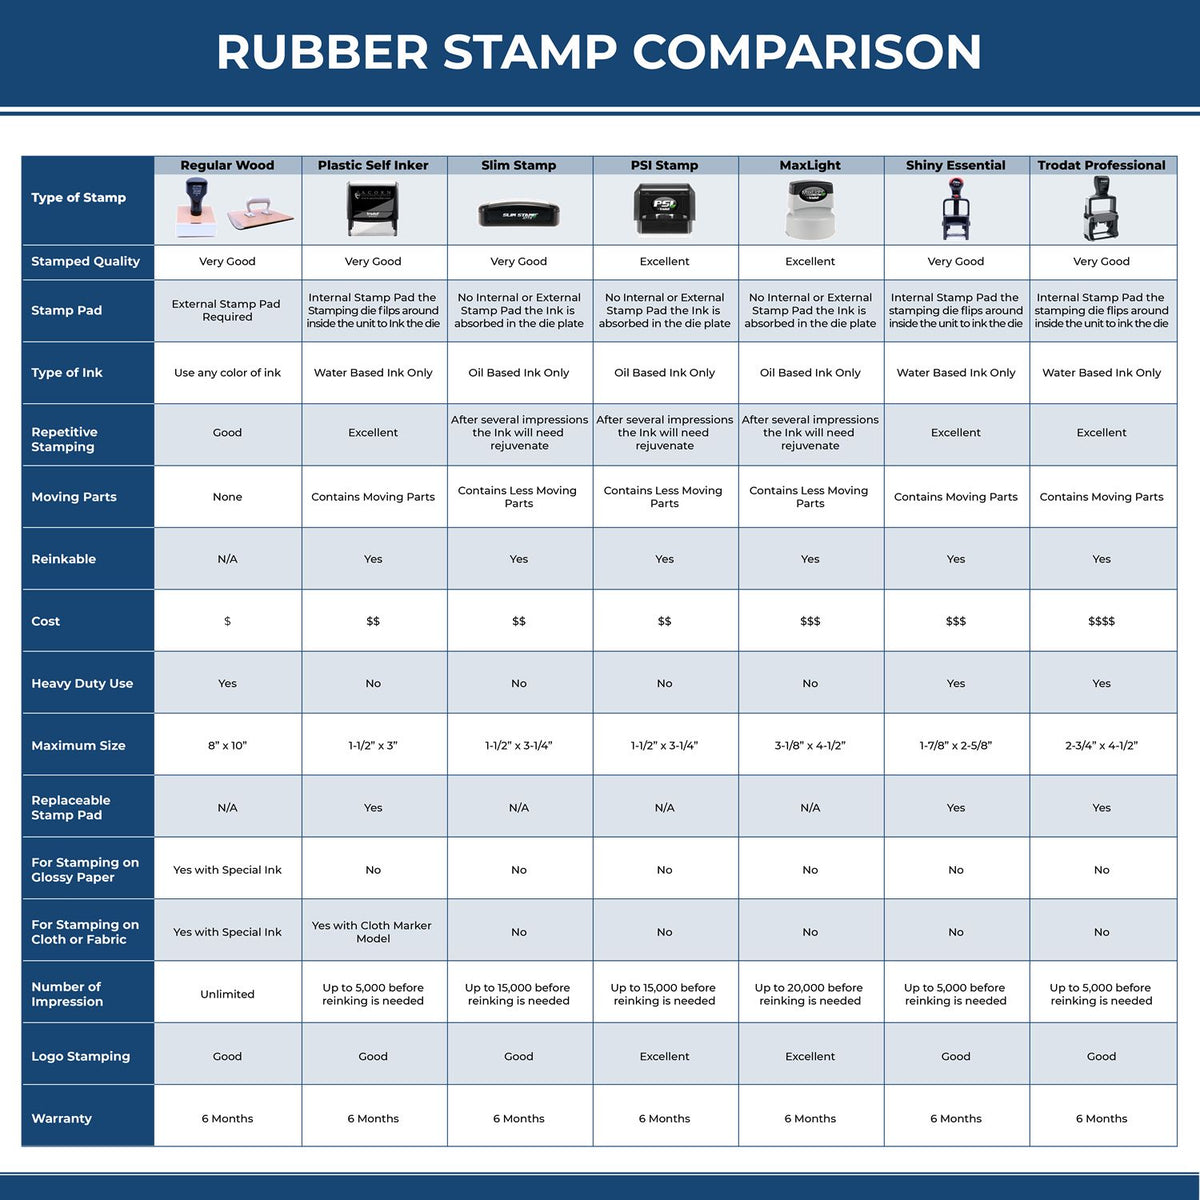 Narrow Font Insurance Verified Rubber Stamp 4410R Rubber Stamp Comparison